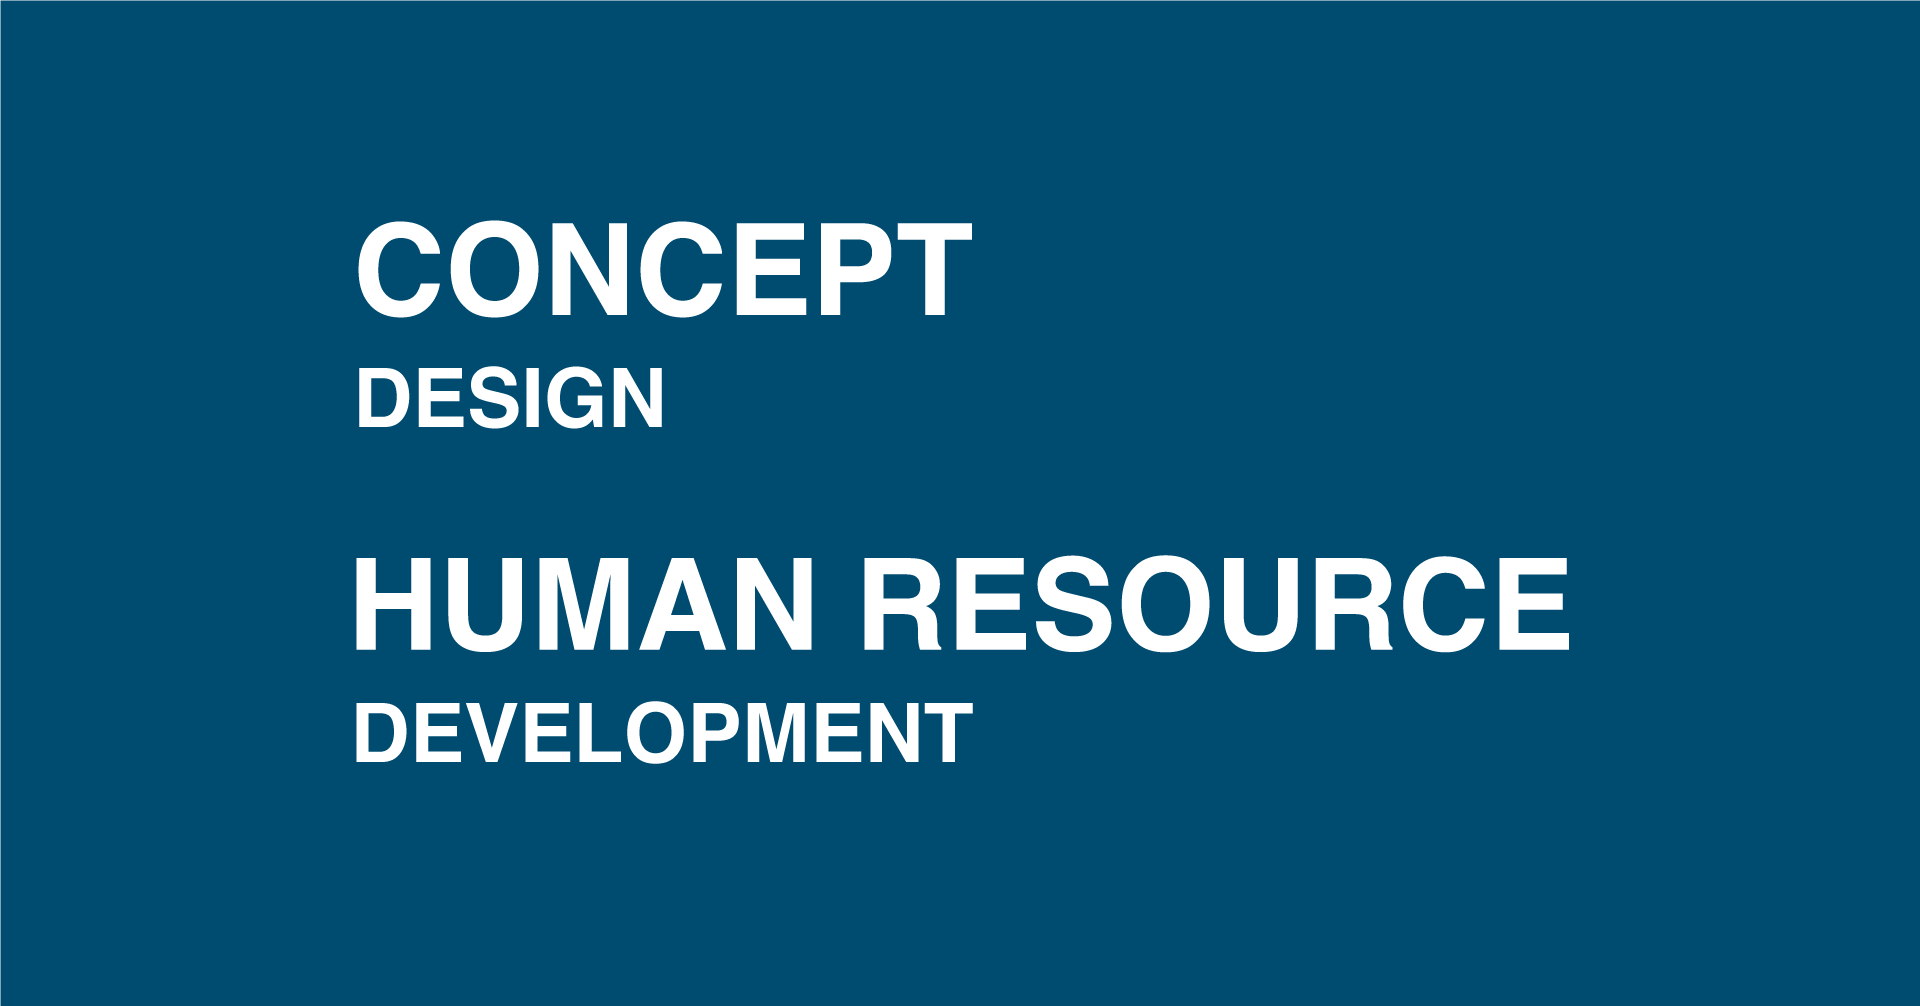 CONCEPT DESIGN & HUMAN RESOURCE DEVELOPMENT OFFICE P コンセプトデザイン 人材育成開発